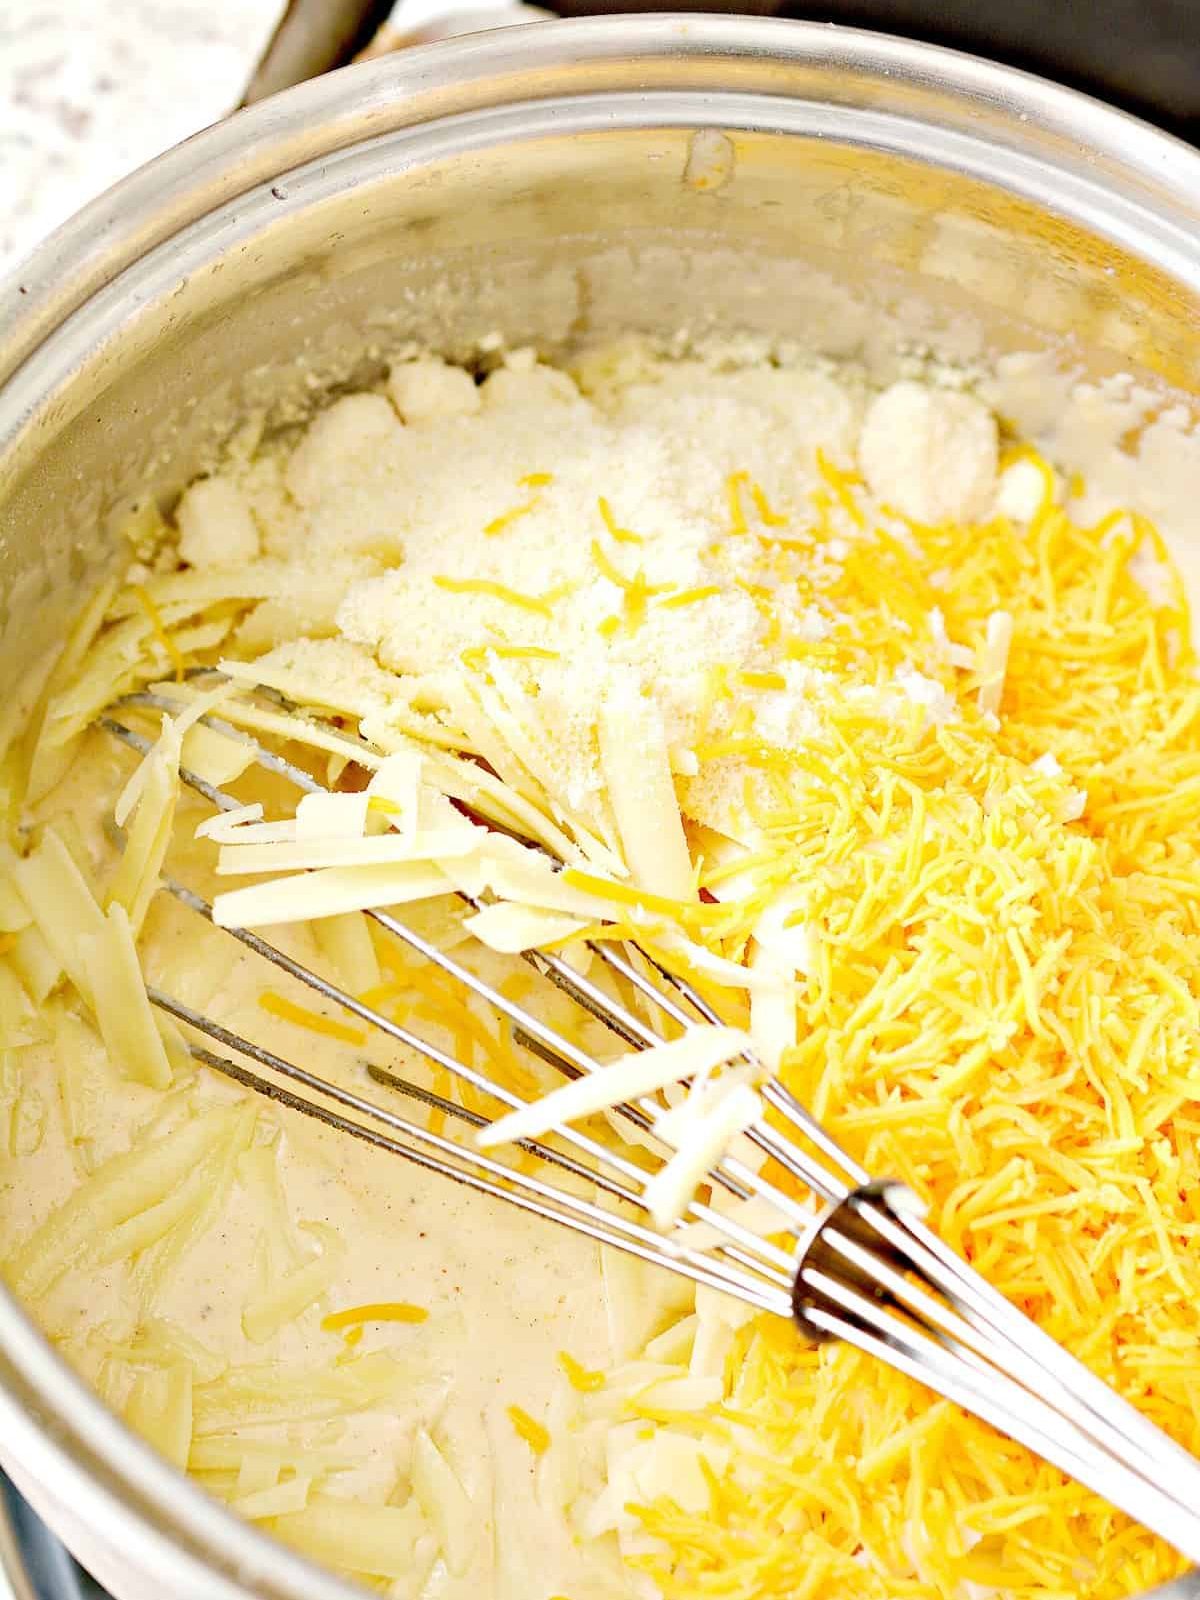 Whisk the cheeses into the sauce mixture until completely melted.